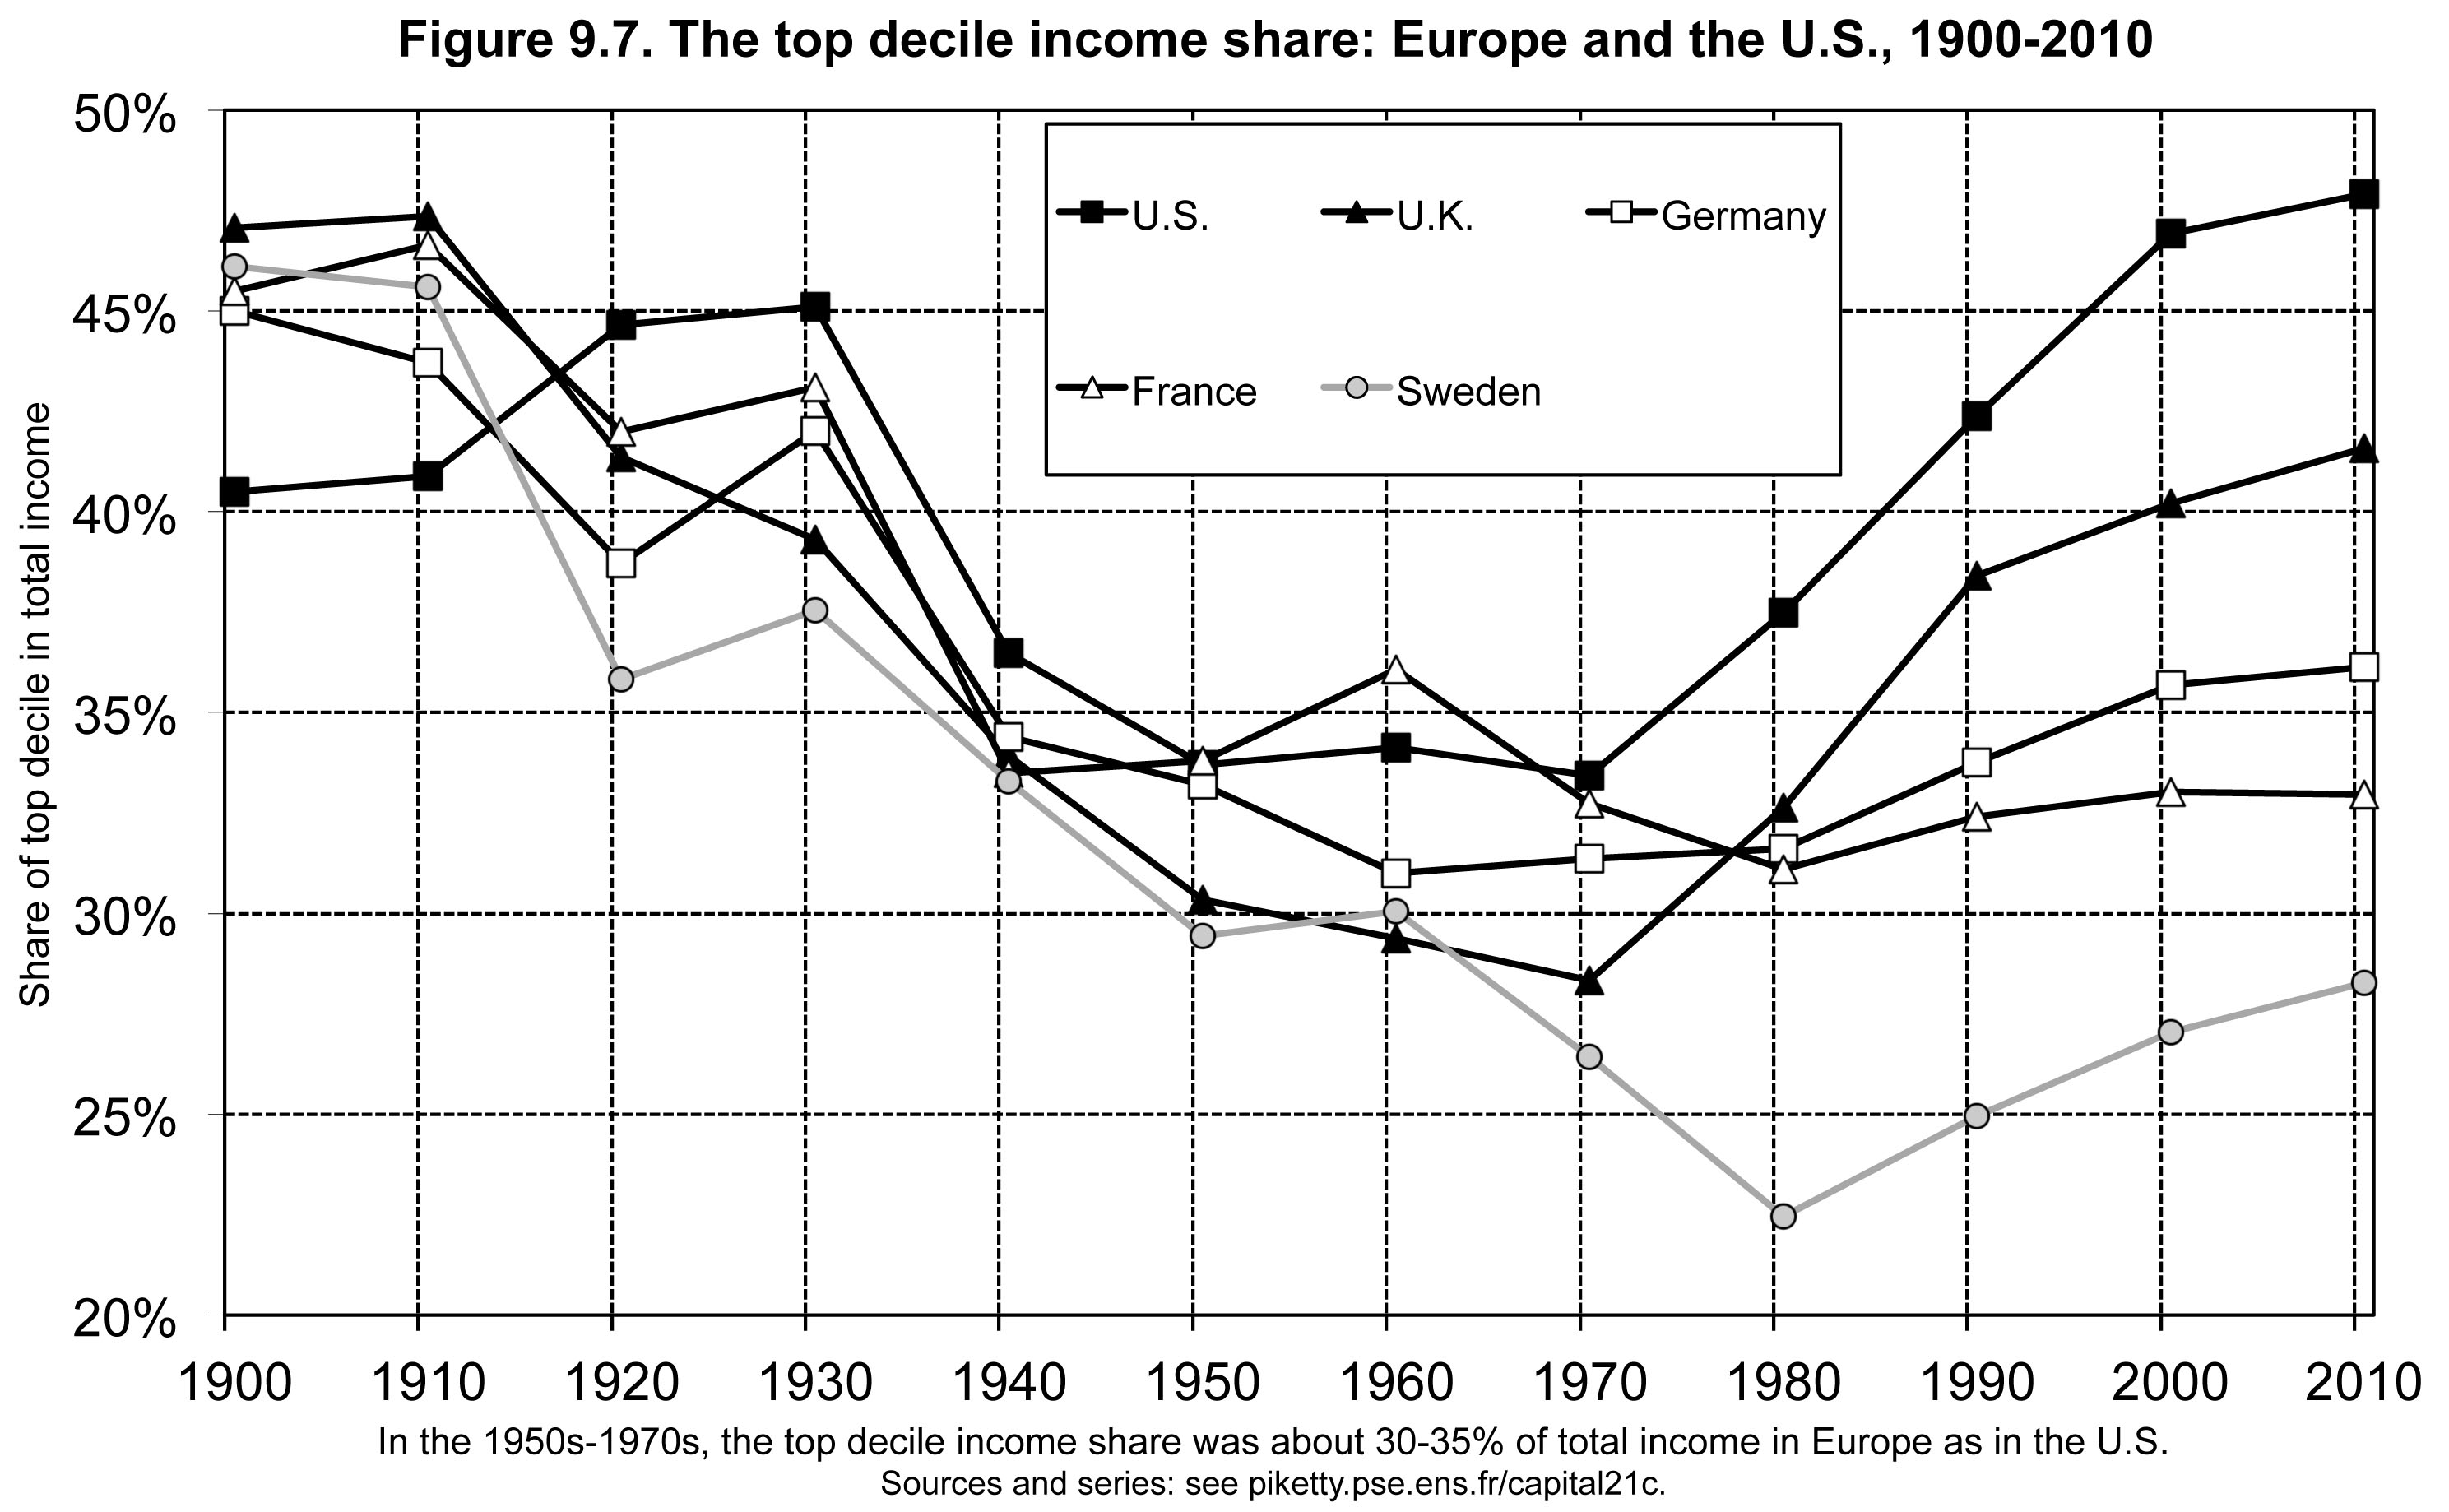 The Top Decile Income Share, Europ and the US, 1900 - 2010